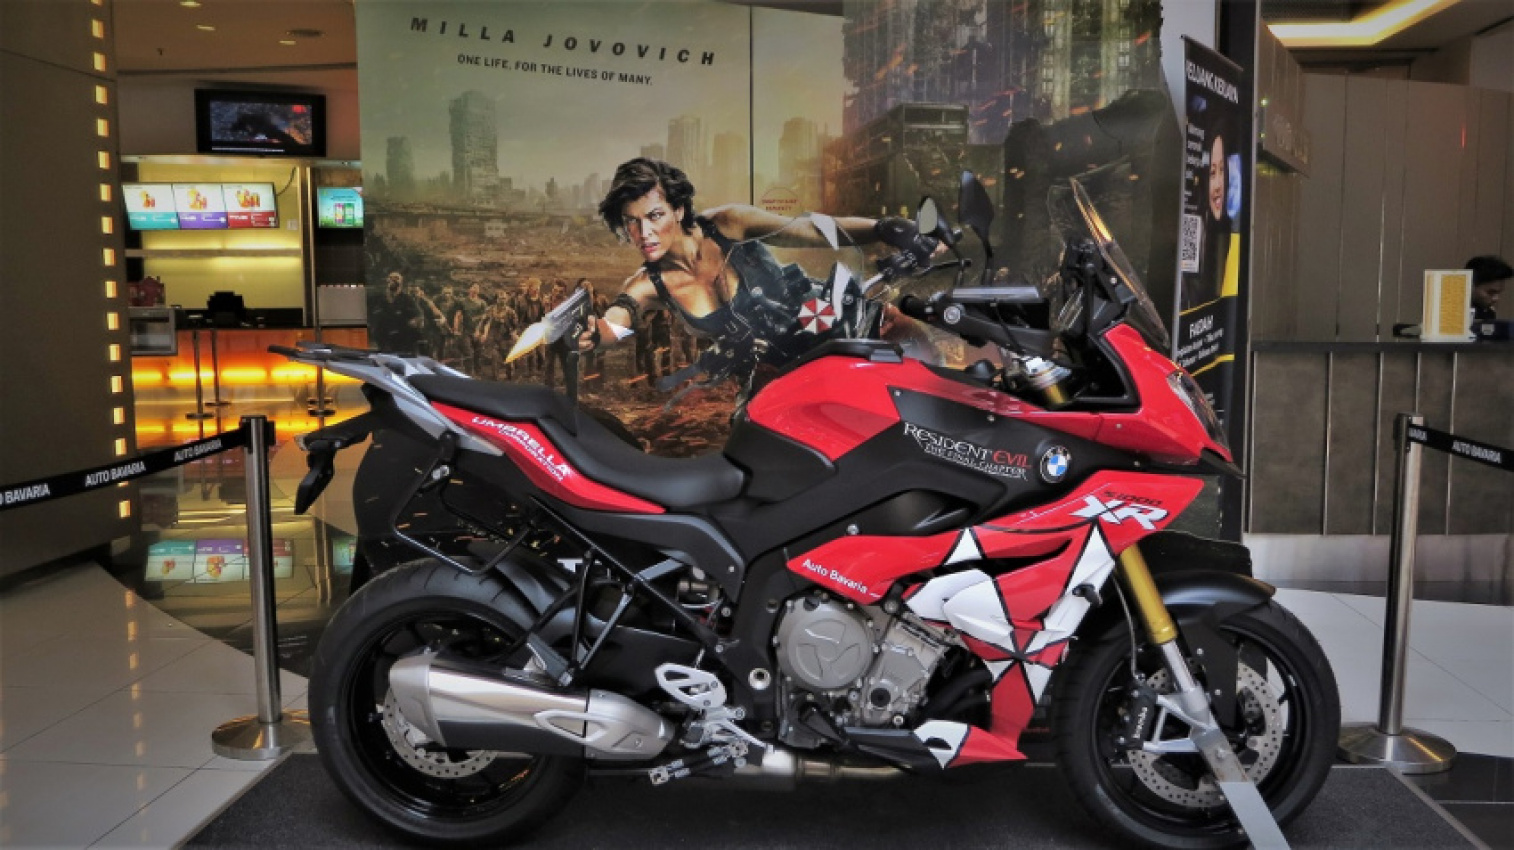 autos, bikes, bmw, cars, bmw motorrad, watch resident evil 6 and you could win bmw motorrad merchandise